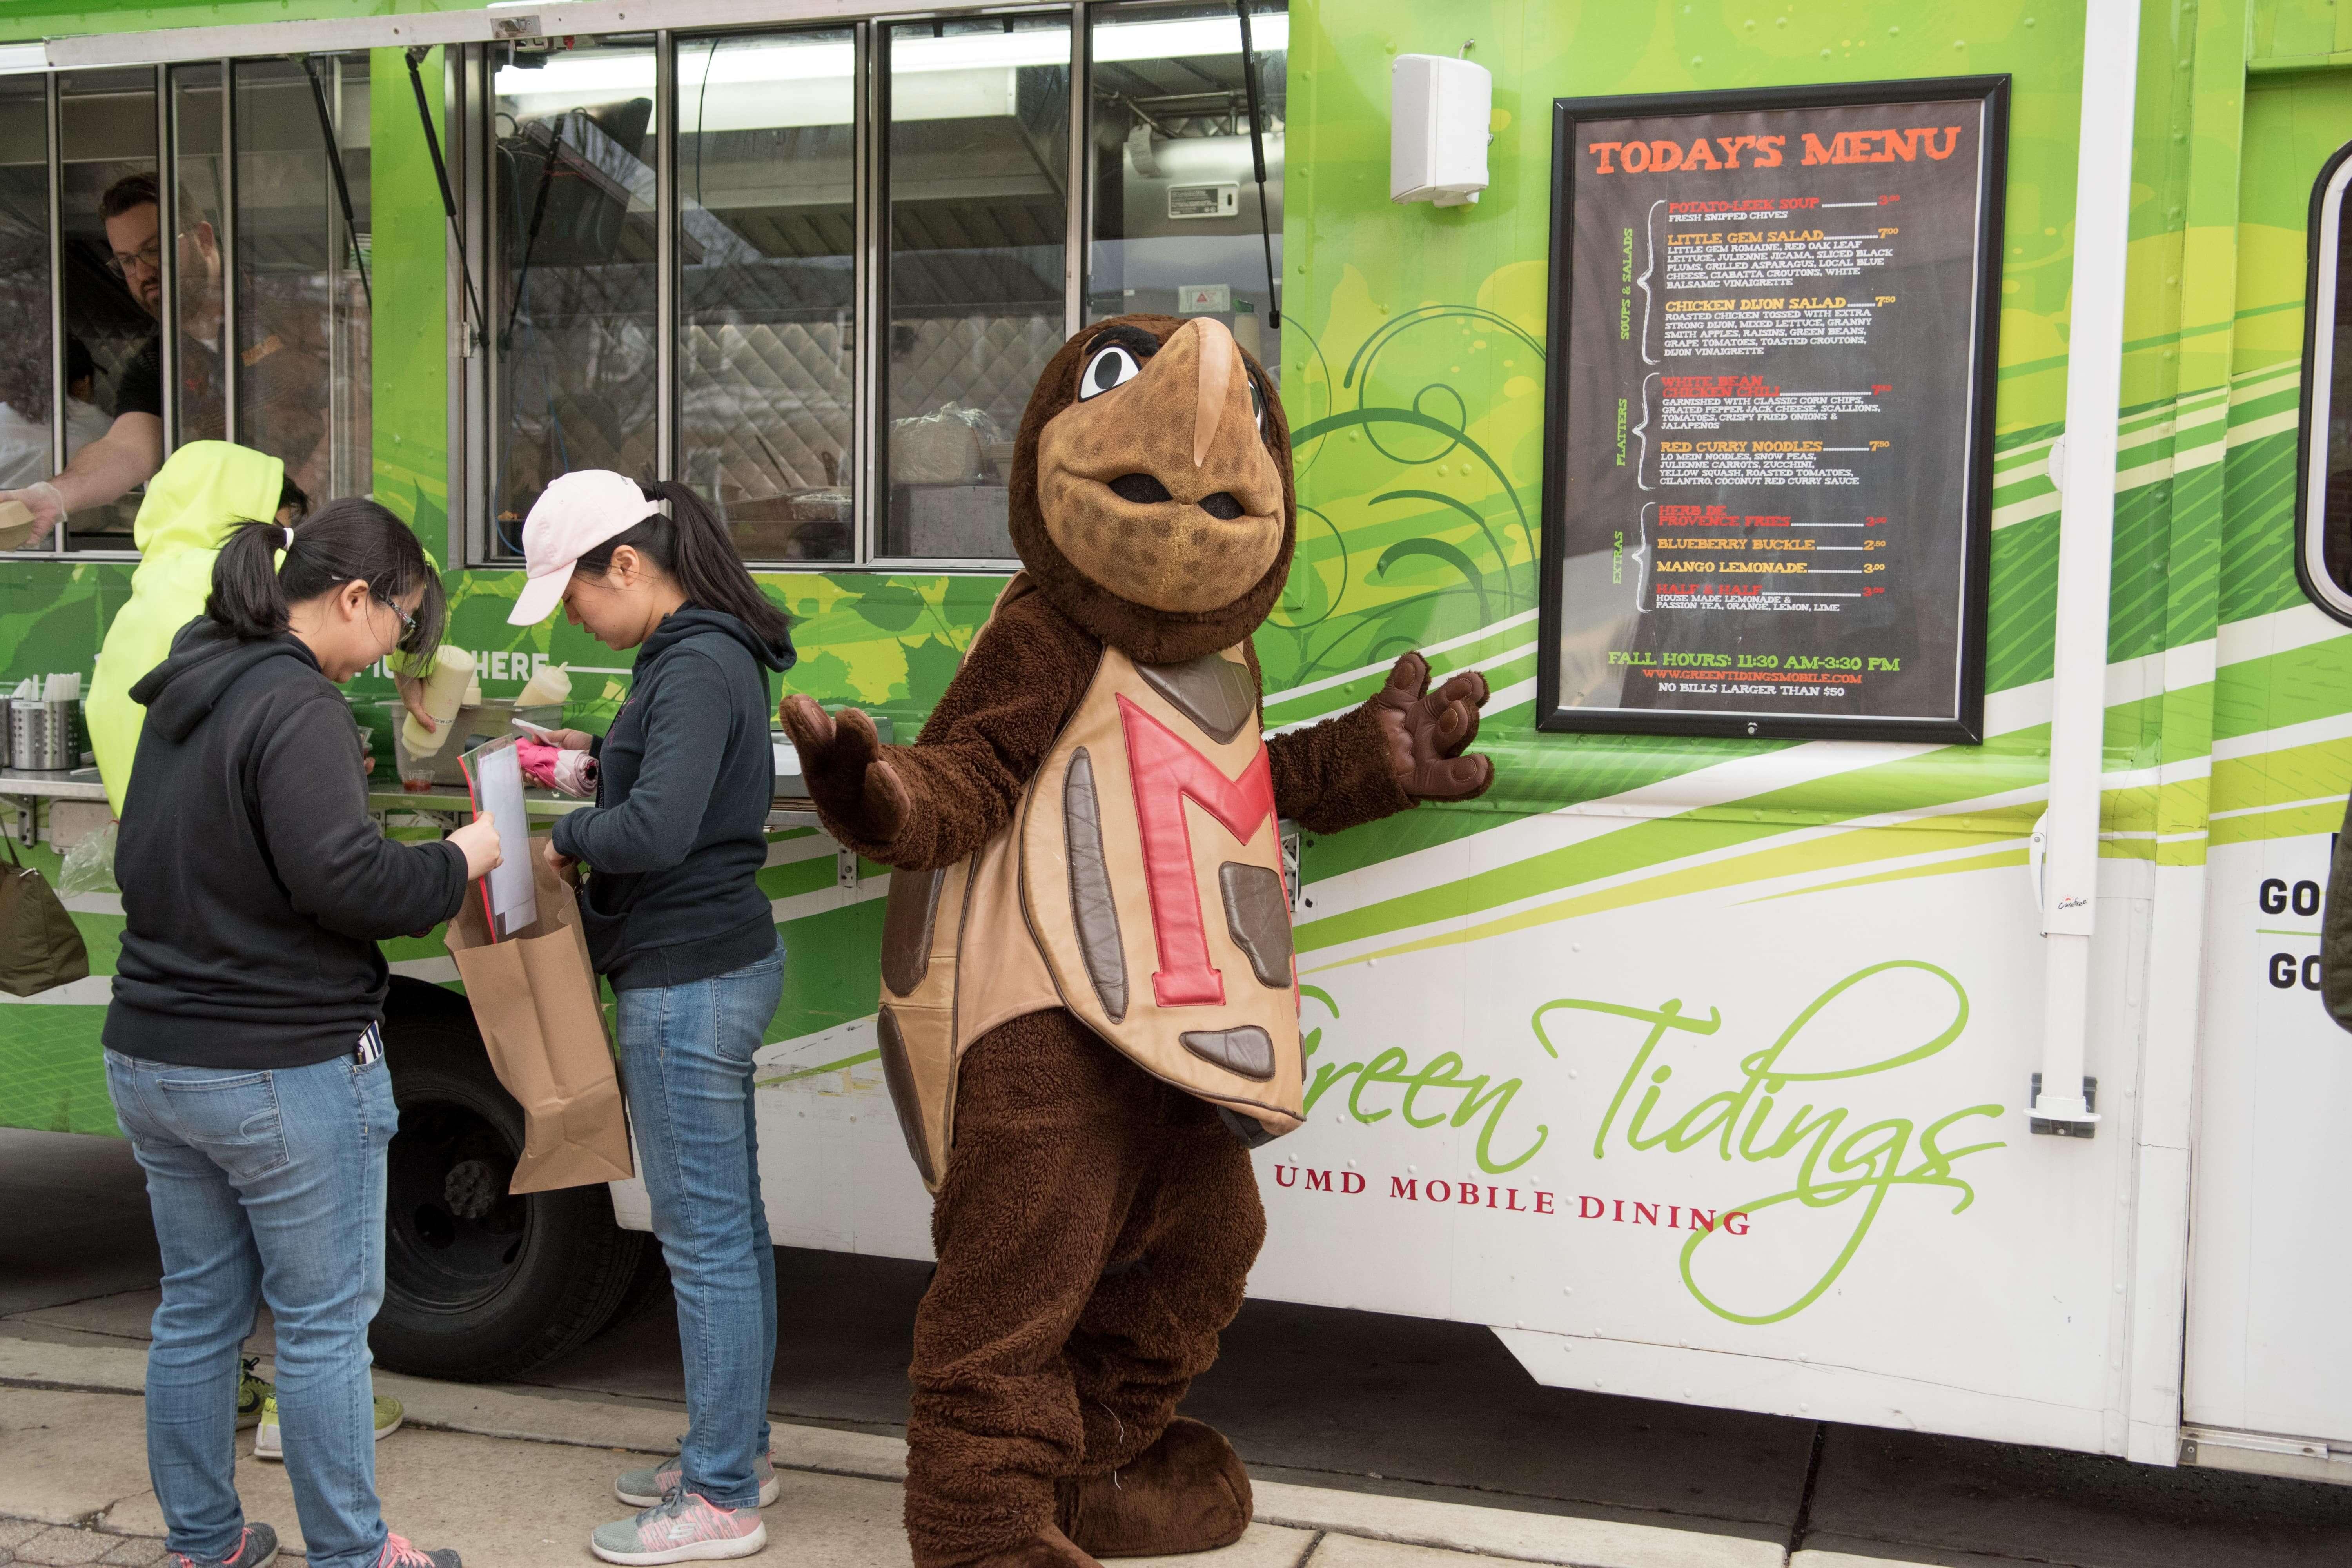 Testudo with Green Things bus